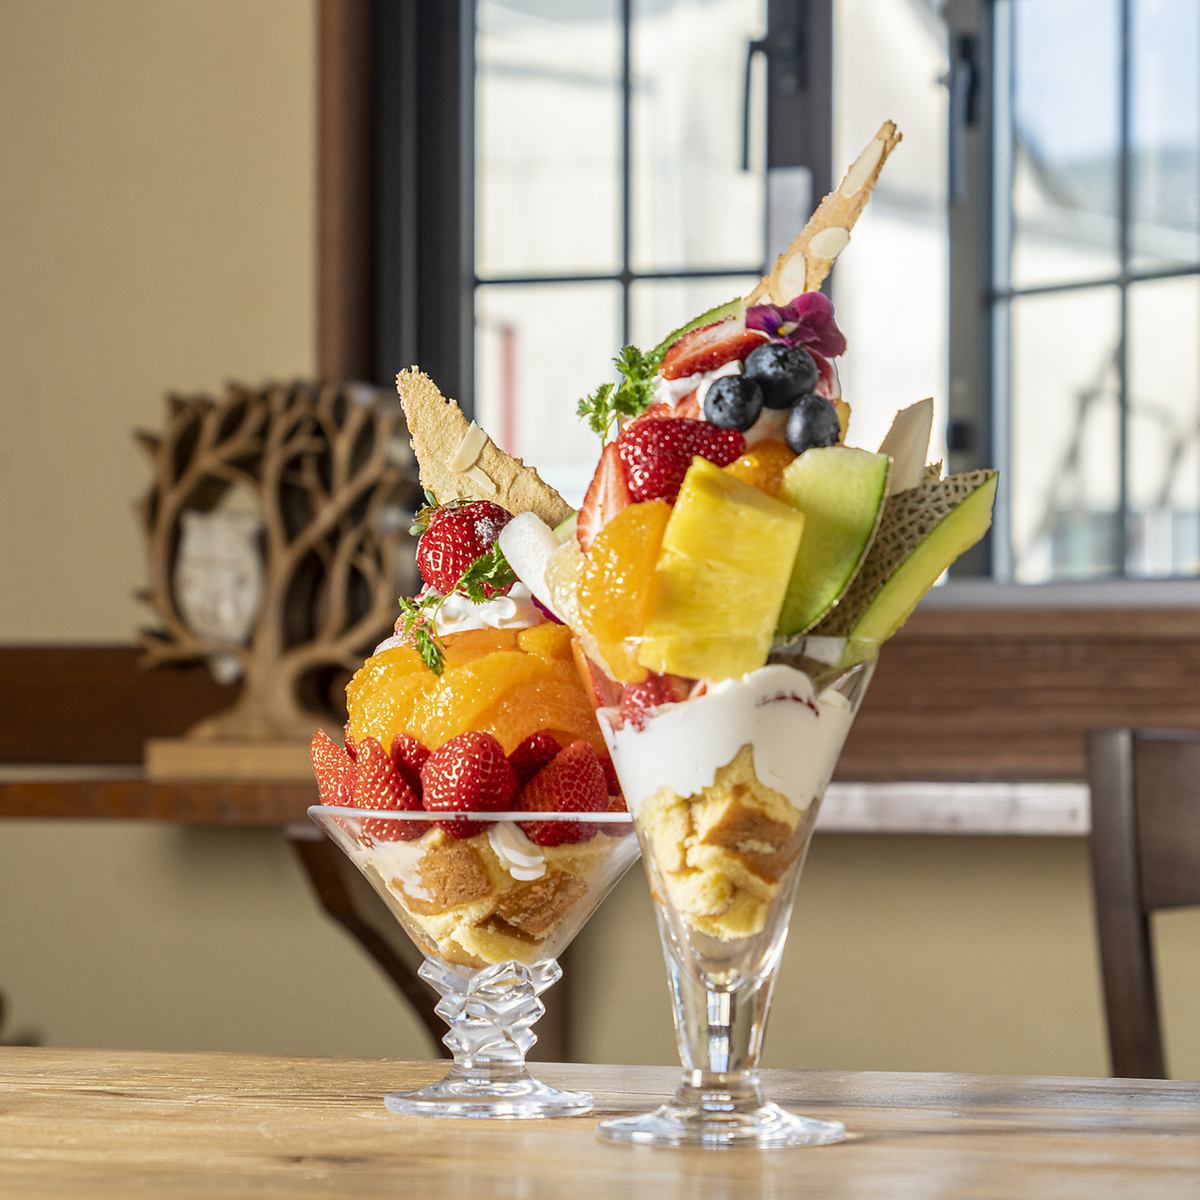 The parfait that uses seasonal fruits and ingredients is popular ◎ Wood-like cafe space is also ♪